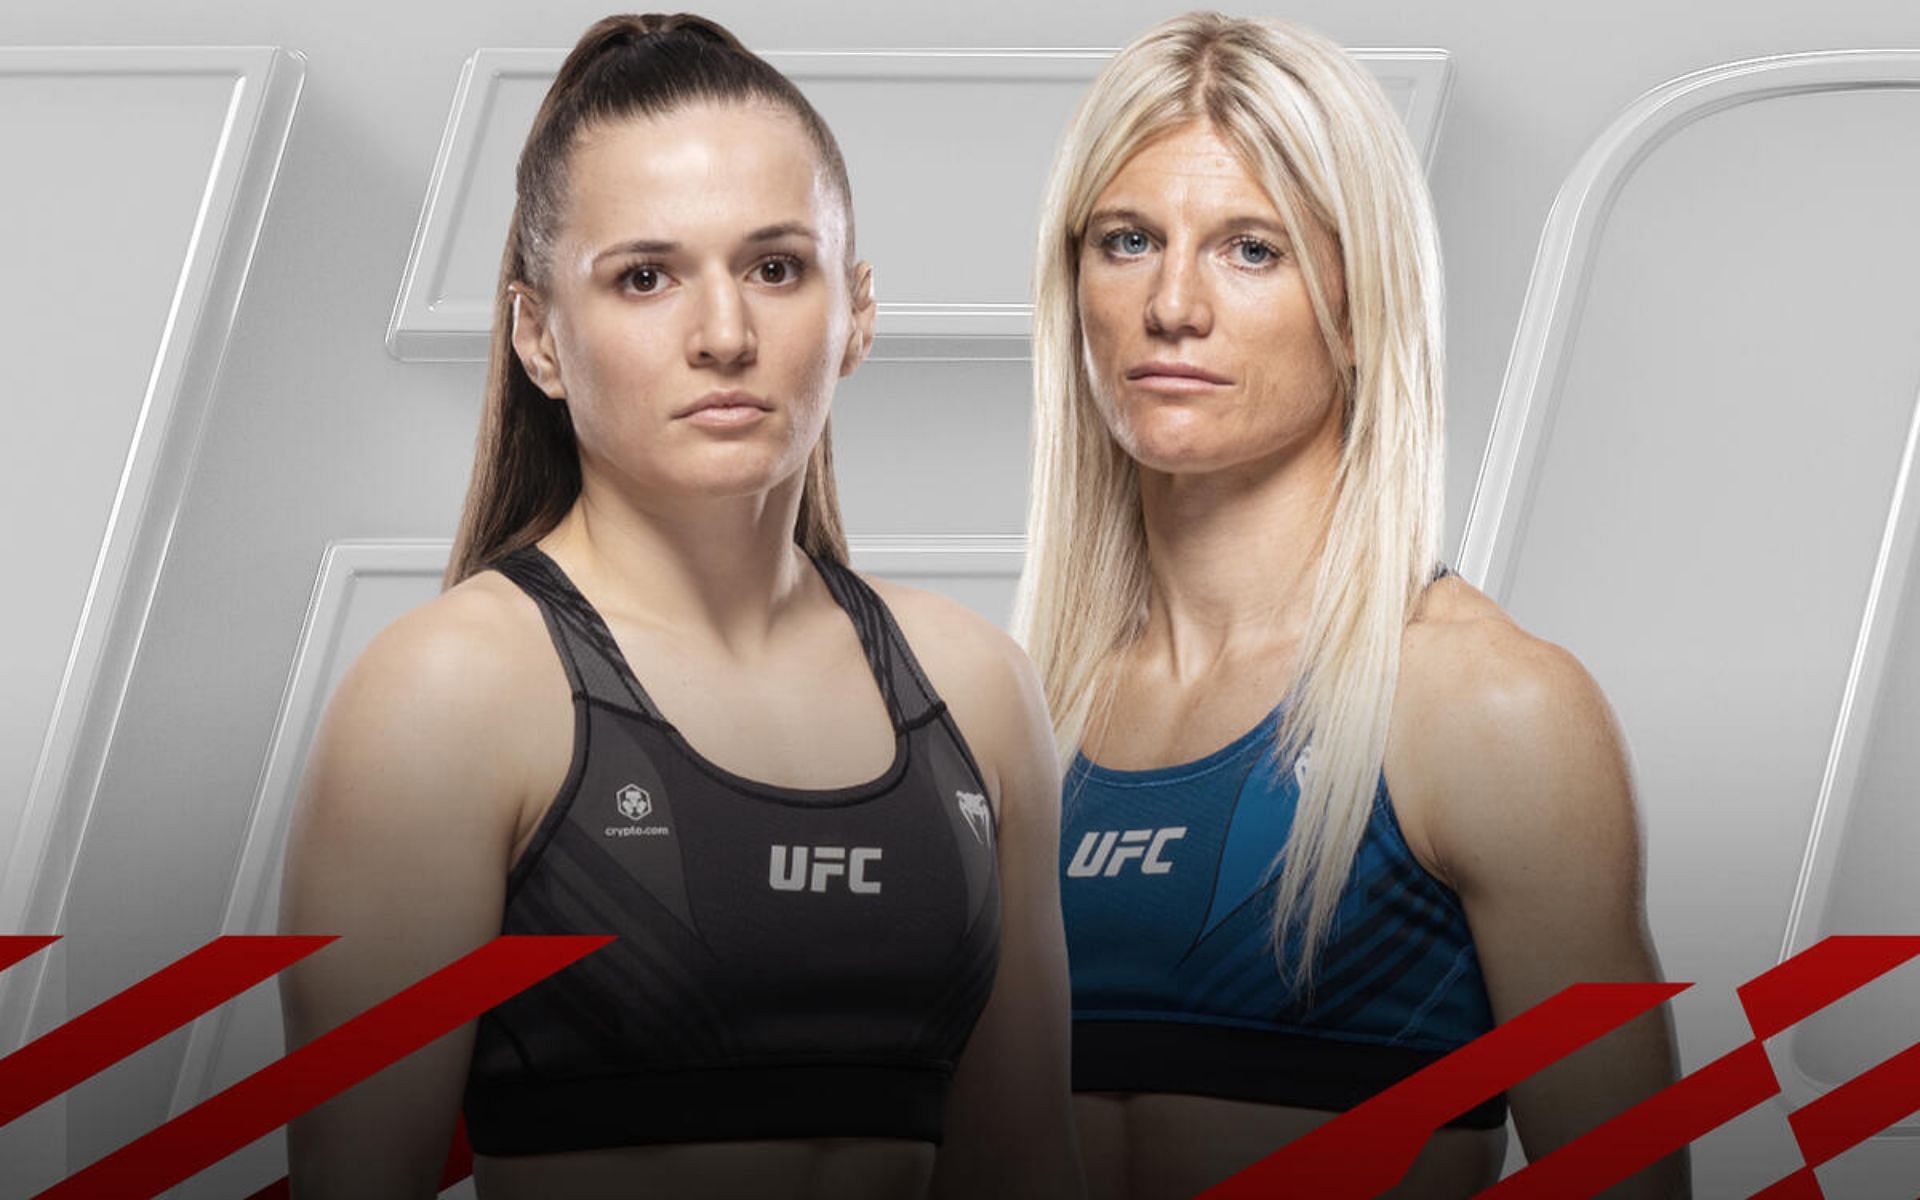 Erin Blanchfield and manon Fiorot will fight on March 30 [Image credits: UFC website]